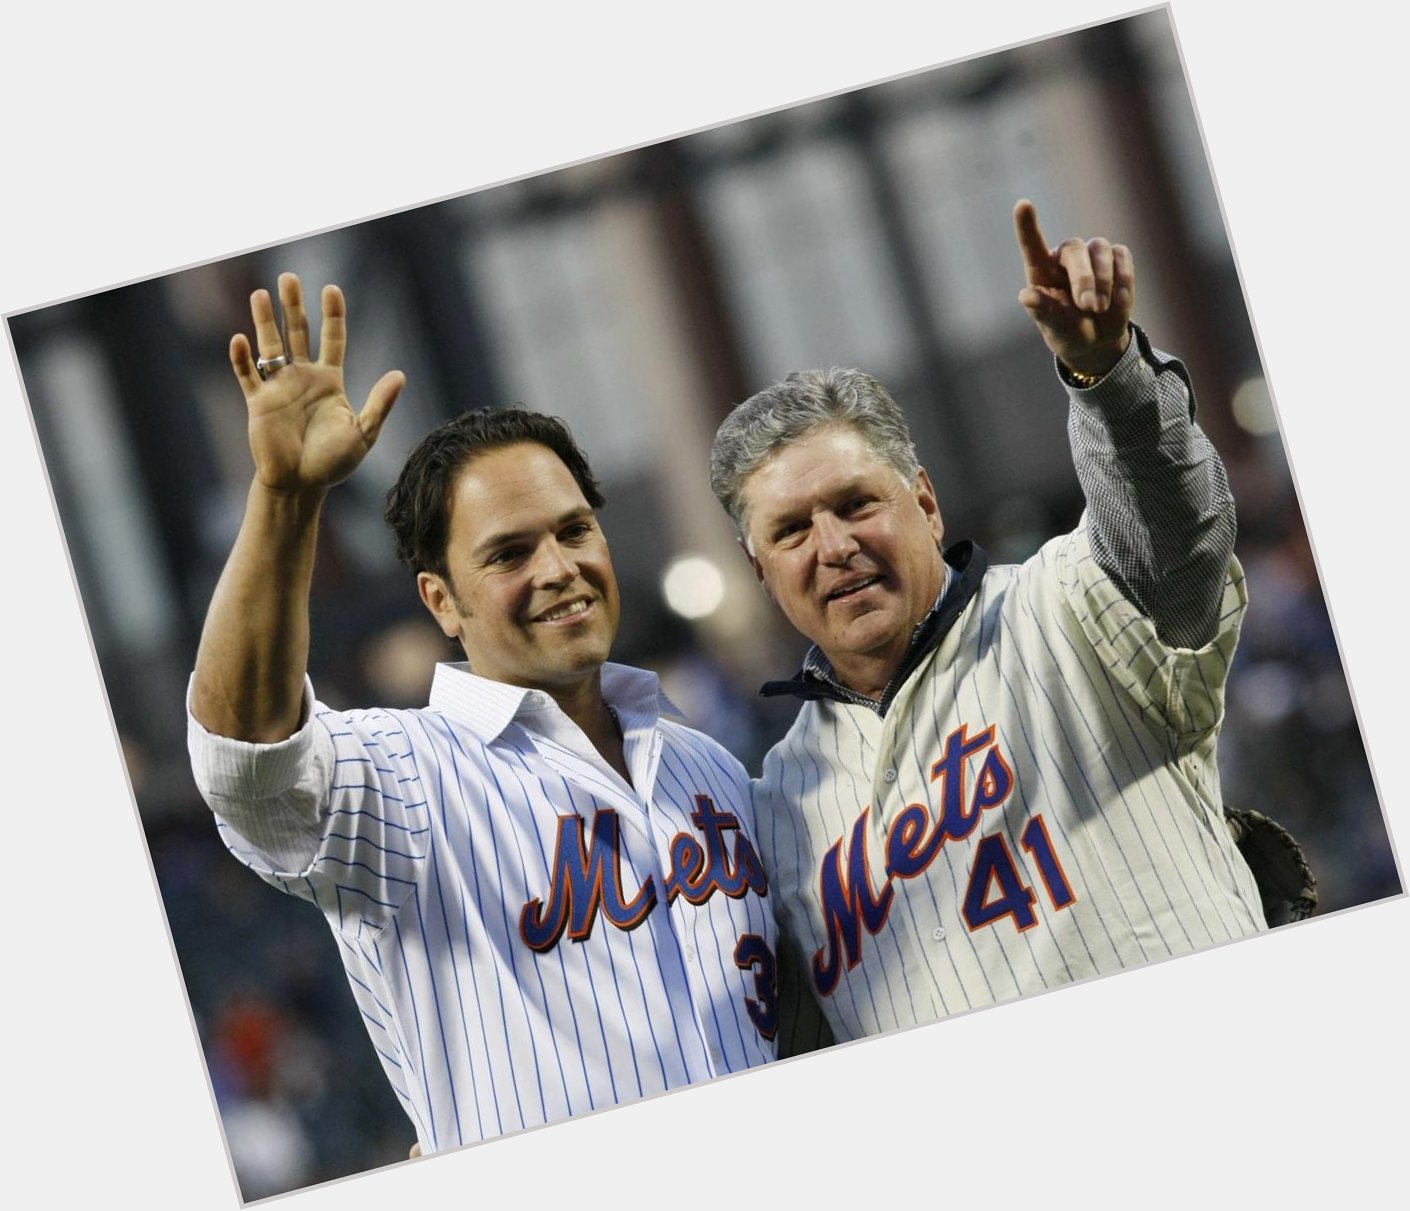 Happy 52nd birthday to Mike Piazza, one of few who stand among Mets royalty 